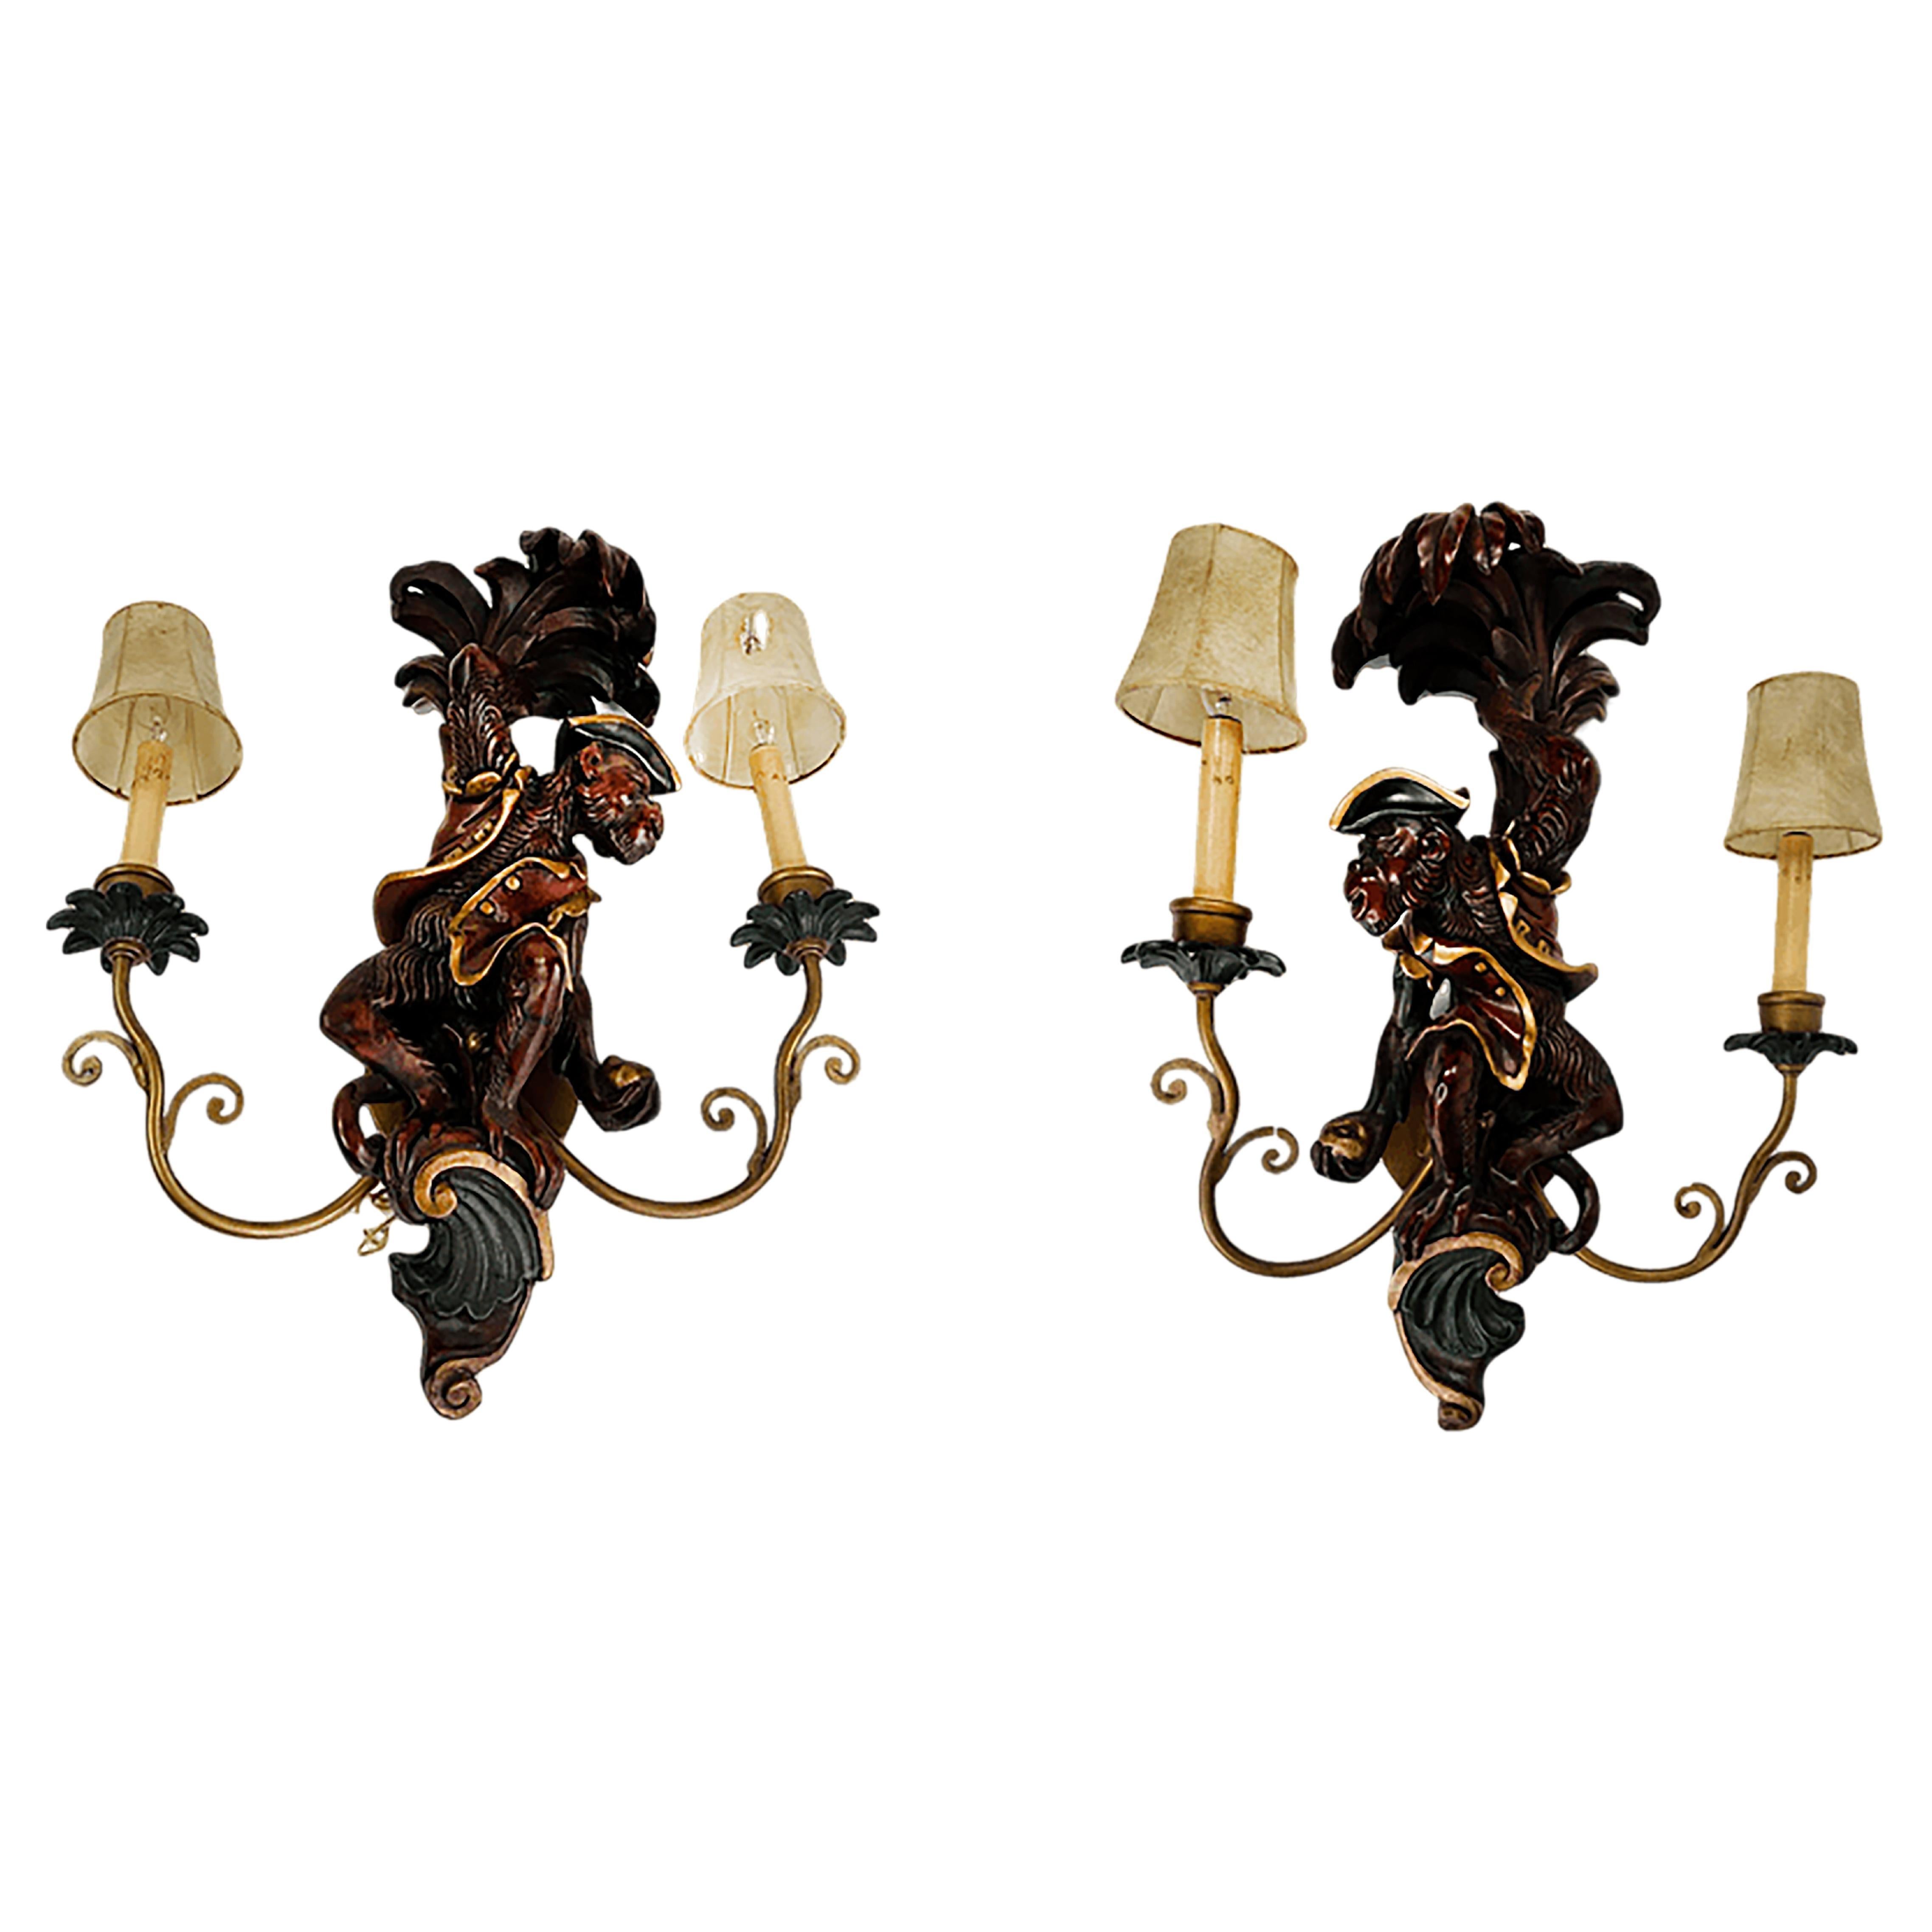 Handsome Set of handmade Wall Light 2 Arm Carved Wood Monkey Sconce Wall Lamps For Sale